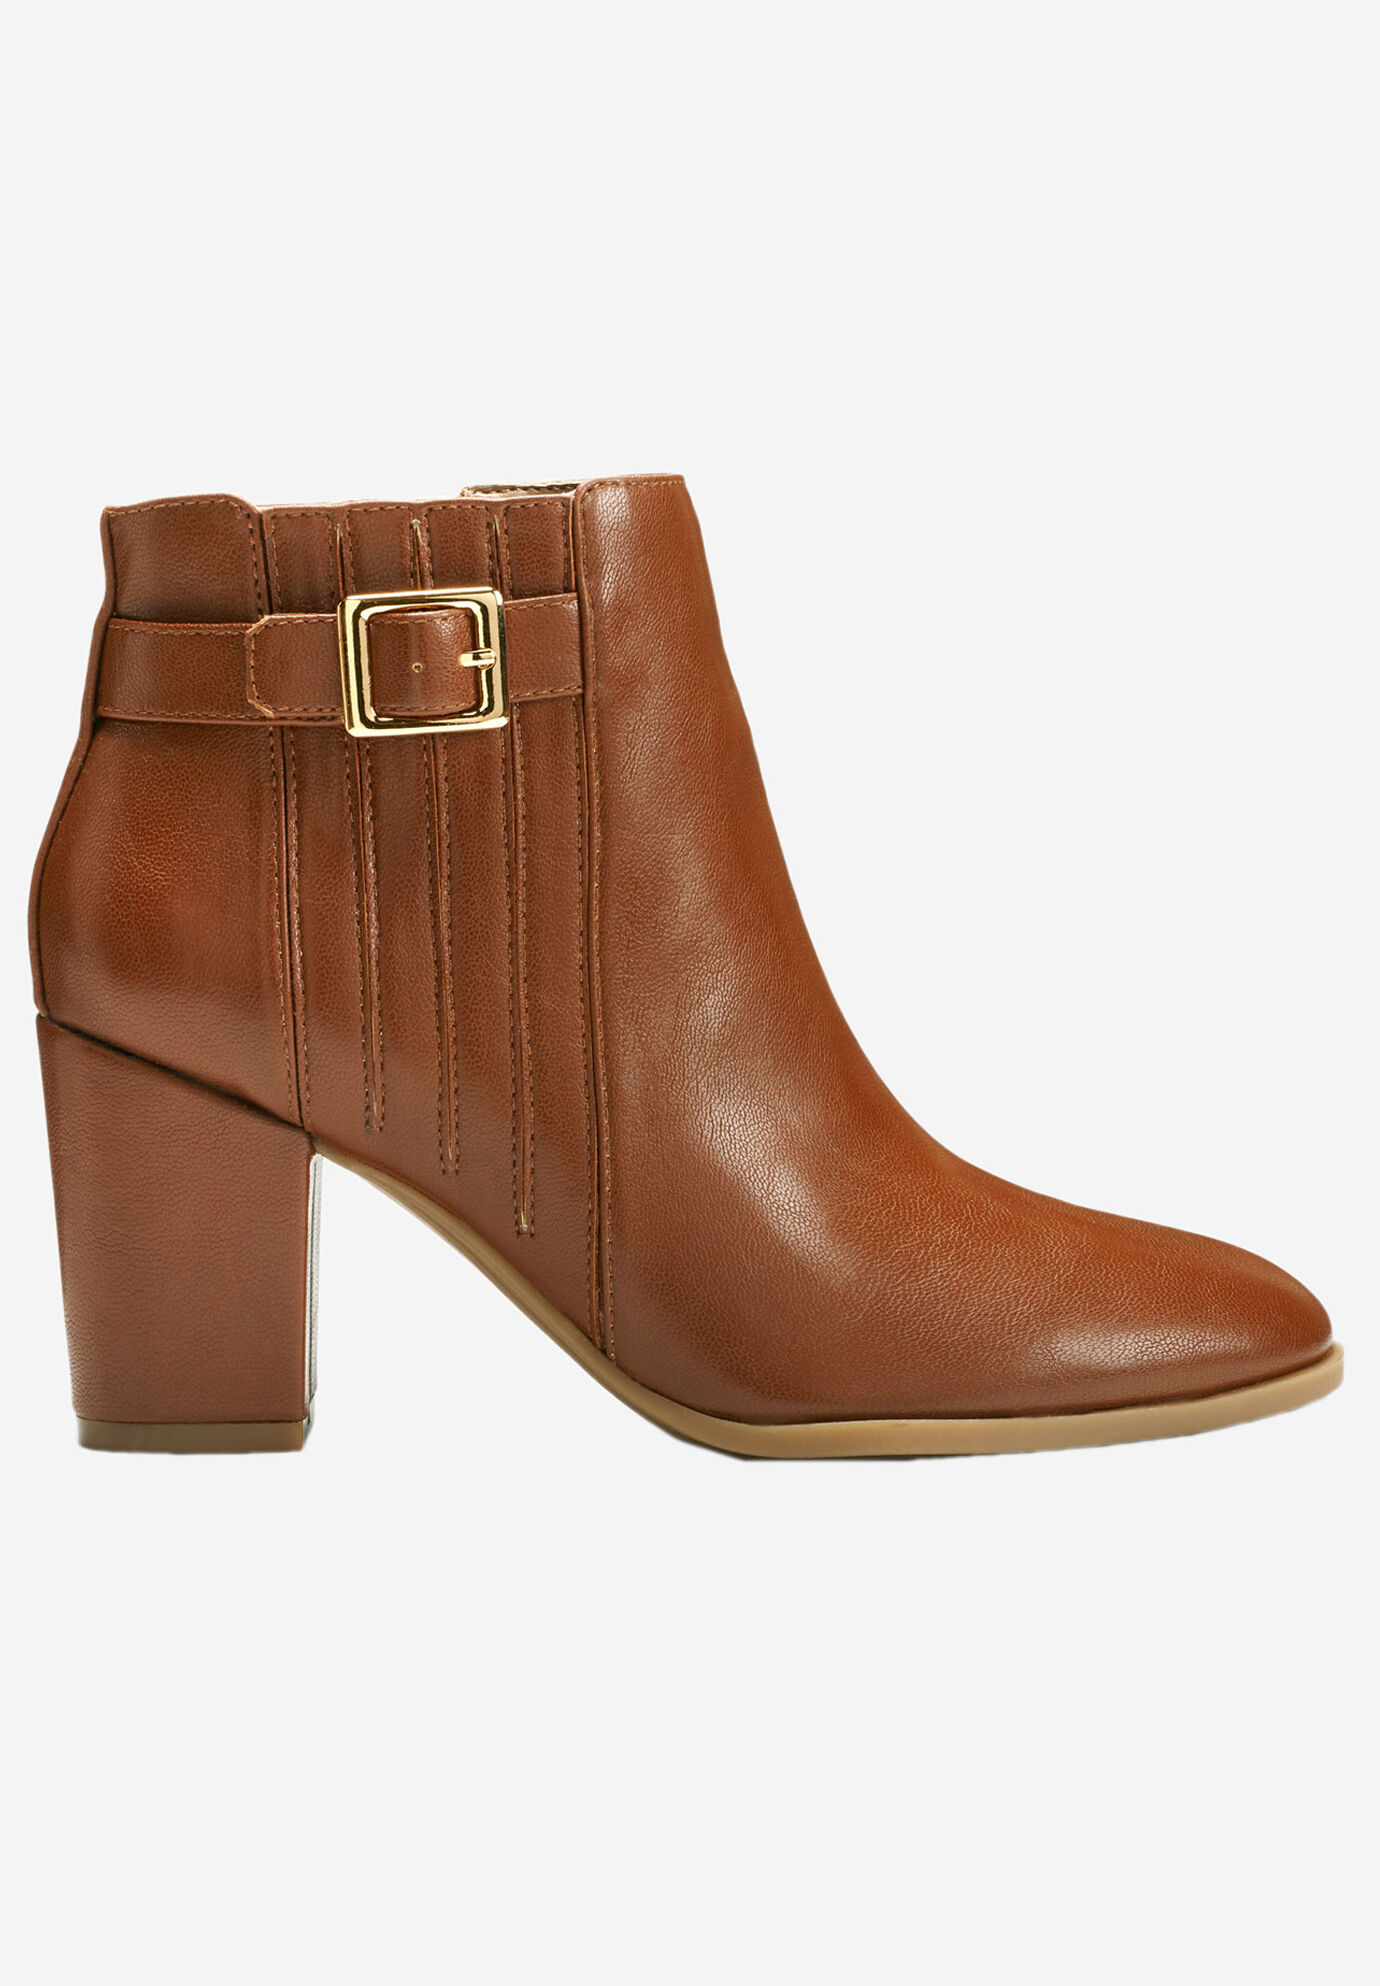 a2 by aerosoles great wall bootie